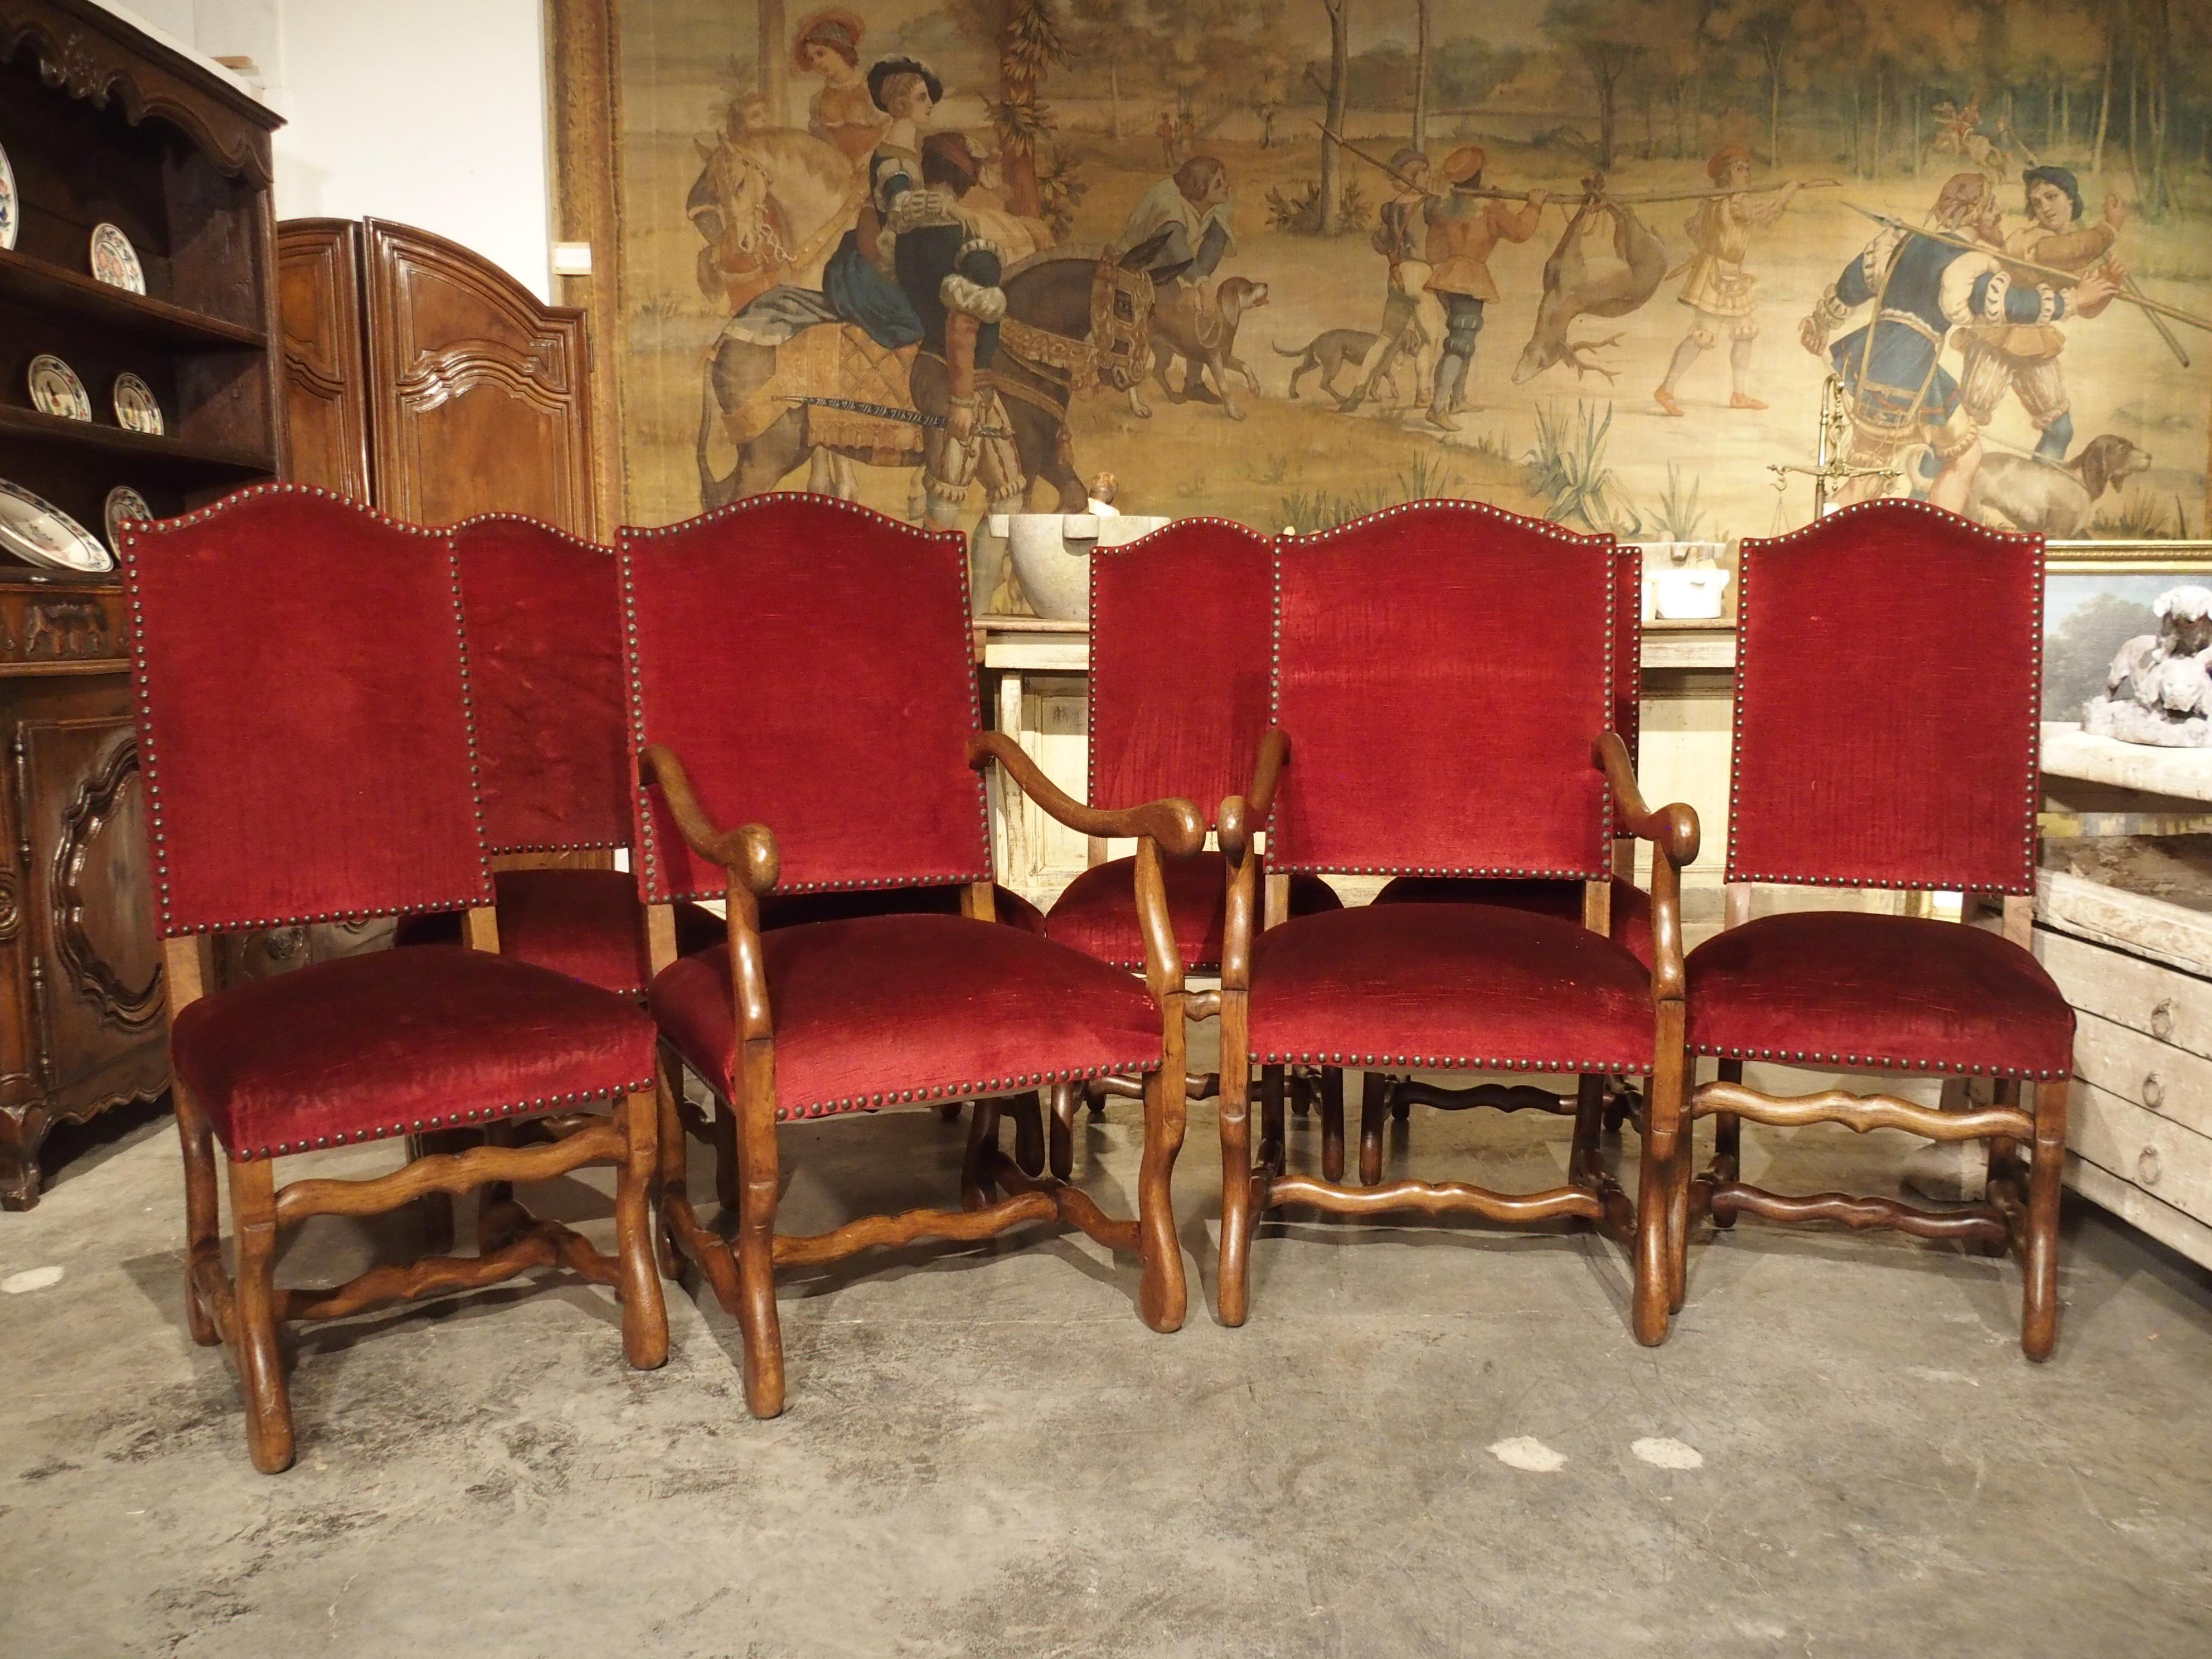 This set of eight Classic French Os de Mouton chairs have been hand carved in oak, assembled with square peg construction and upholstered in a deep red. There are six dining chairs plus two wider “king and queen” armchairs.

These chairs date to